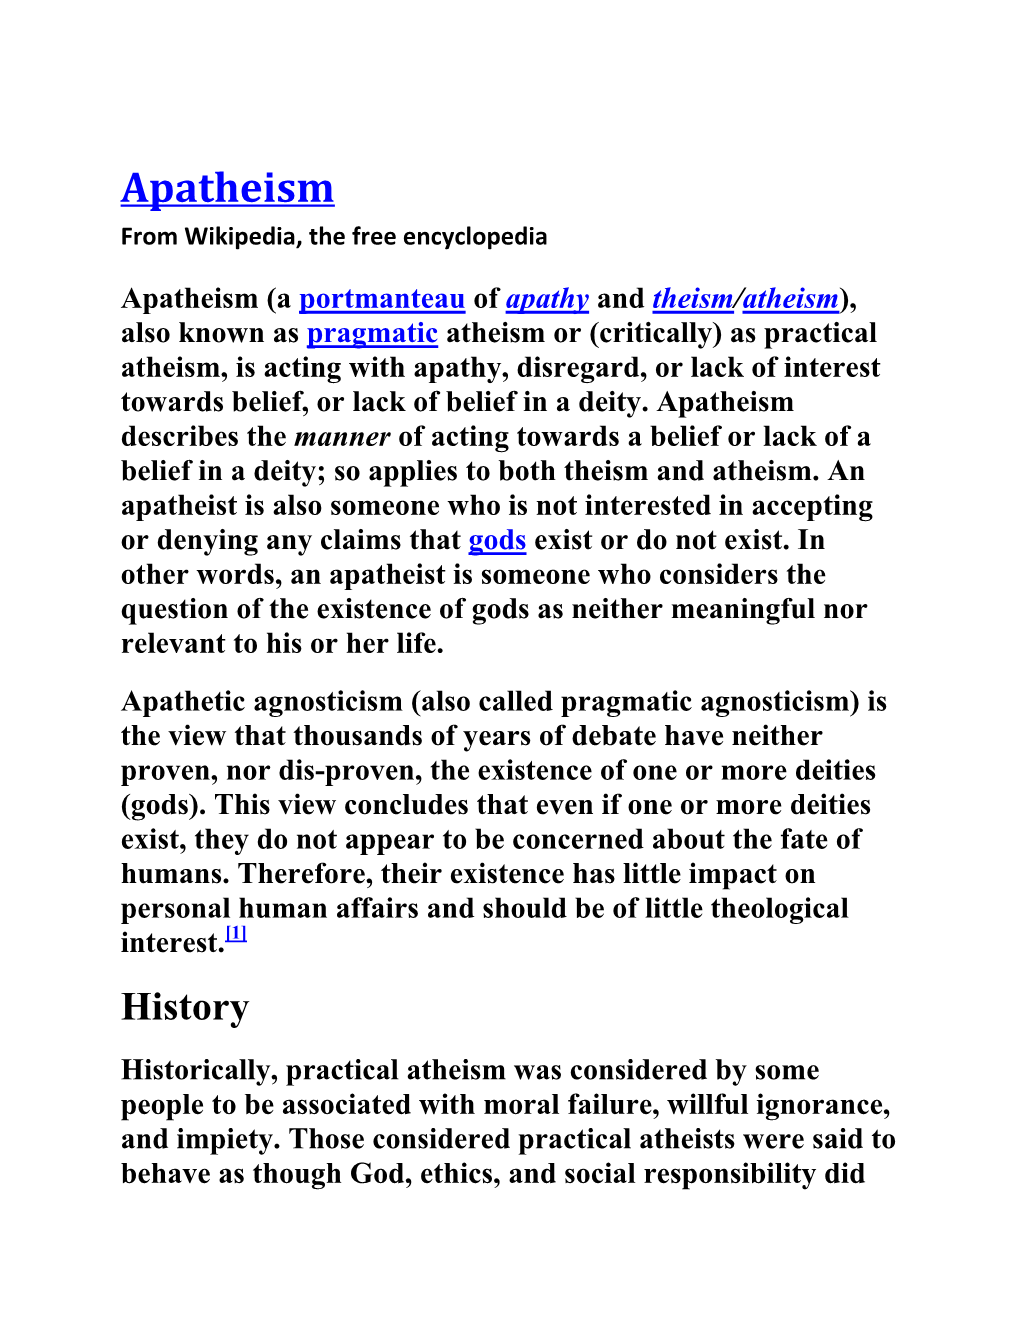 Apatheism from Wikipedia, the Free Encyclopedia